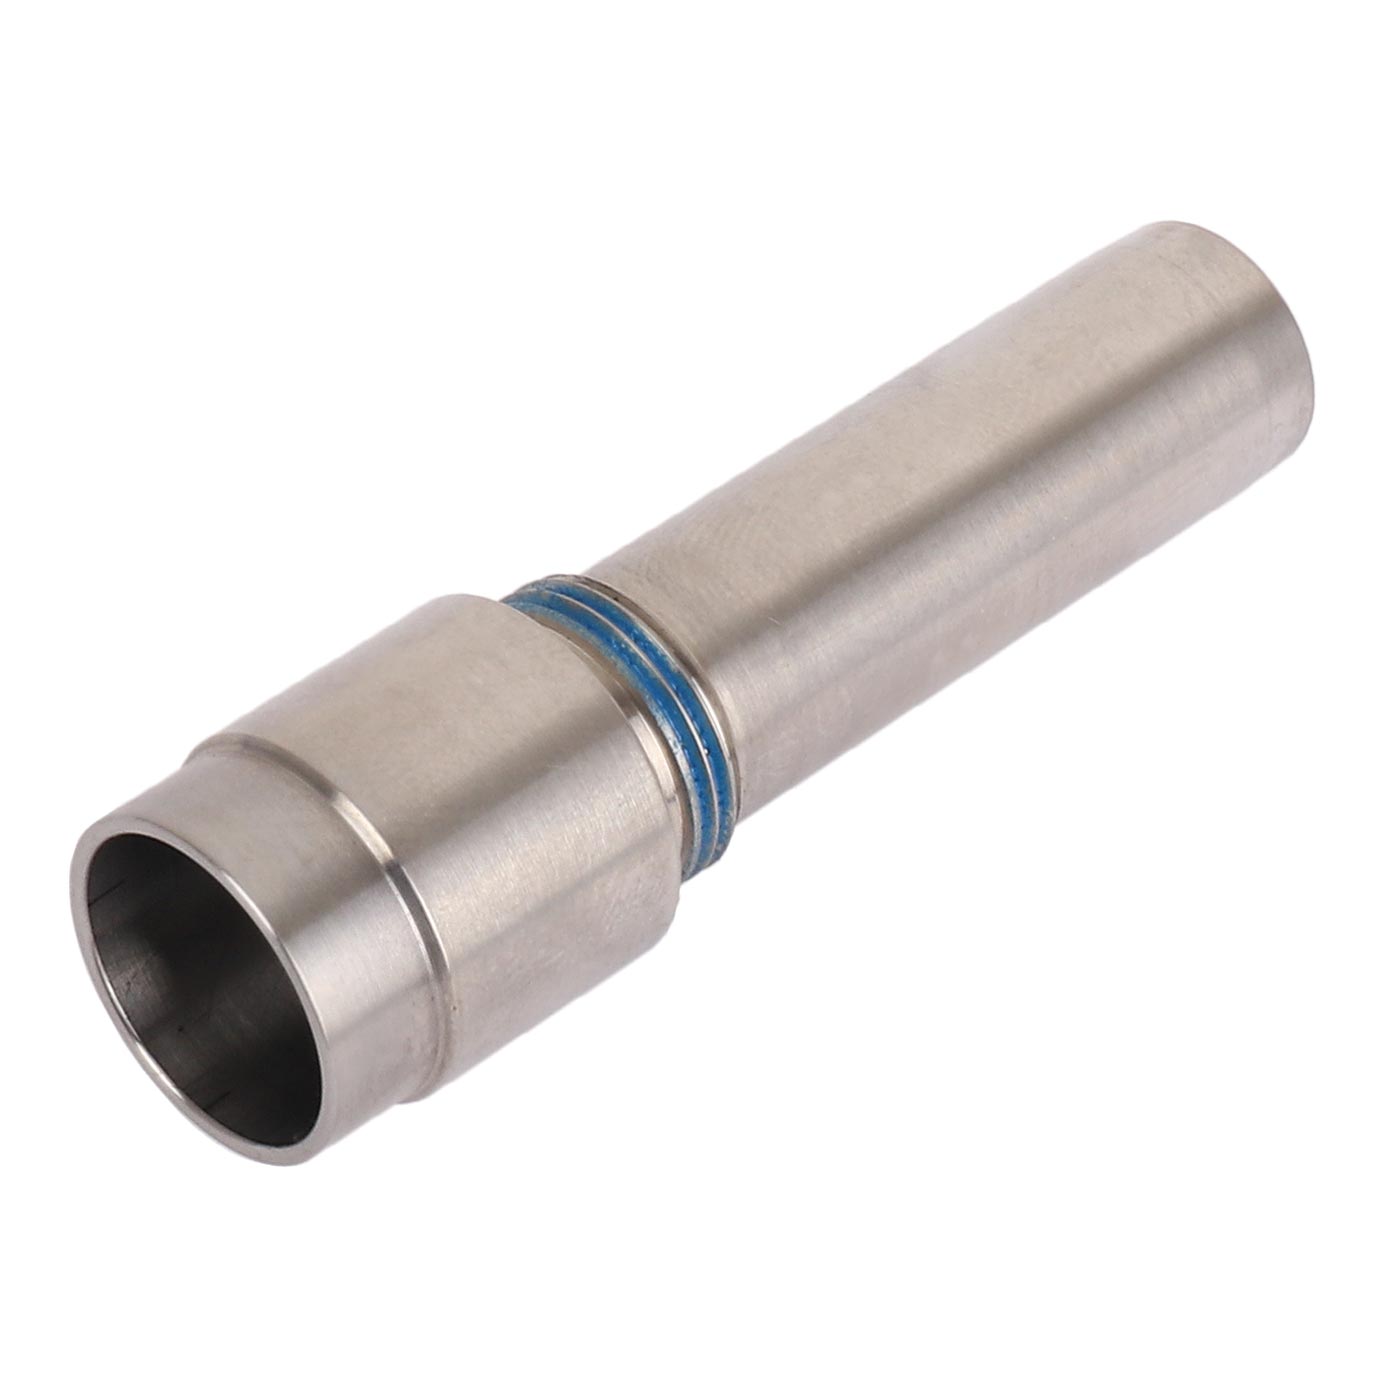 Image of Crankbrothers Titanium Axle Sleeve for Eggbeater 11 Pedals as from 2011 - #13081